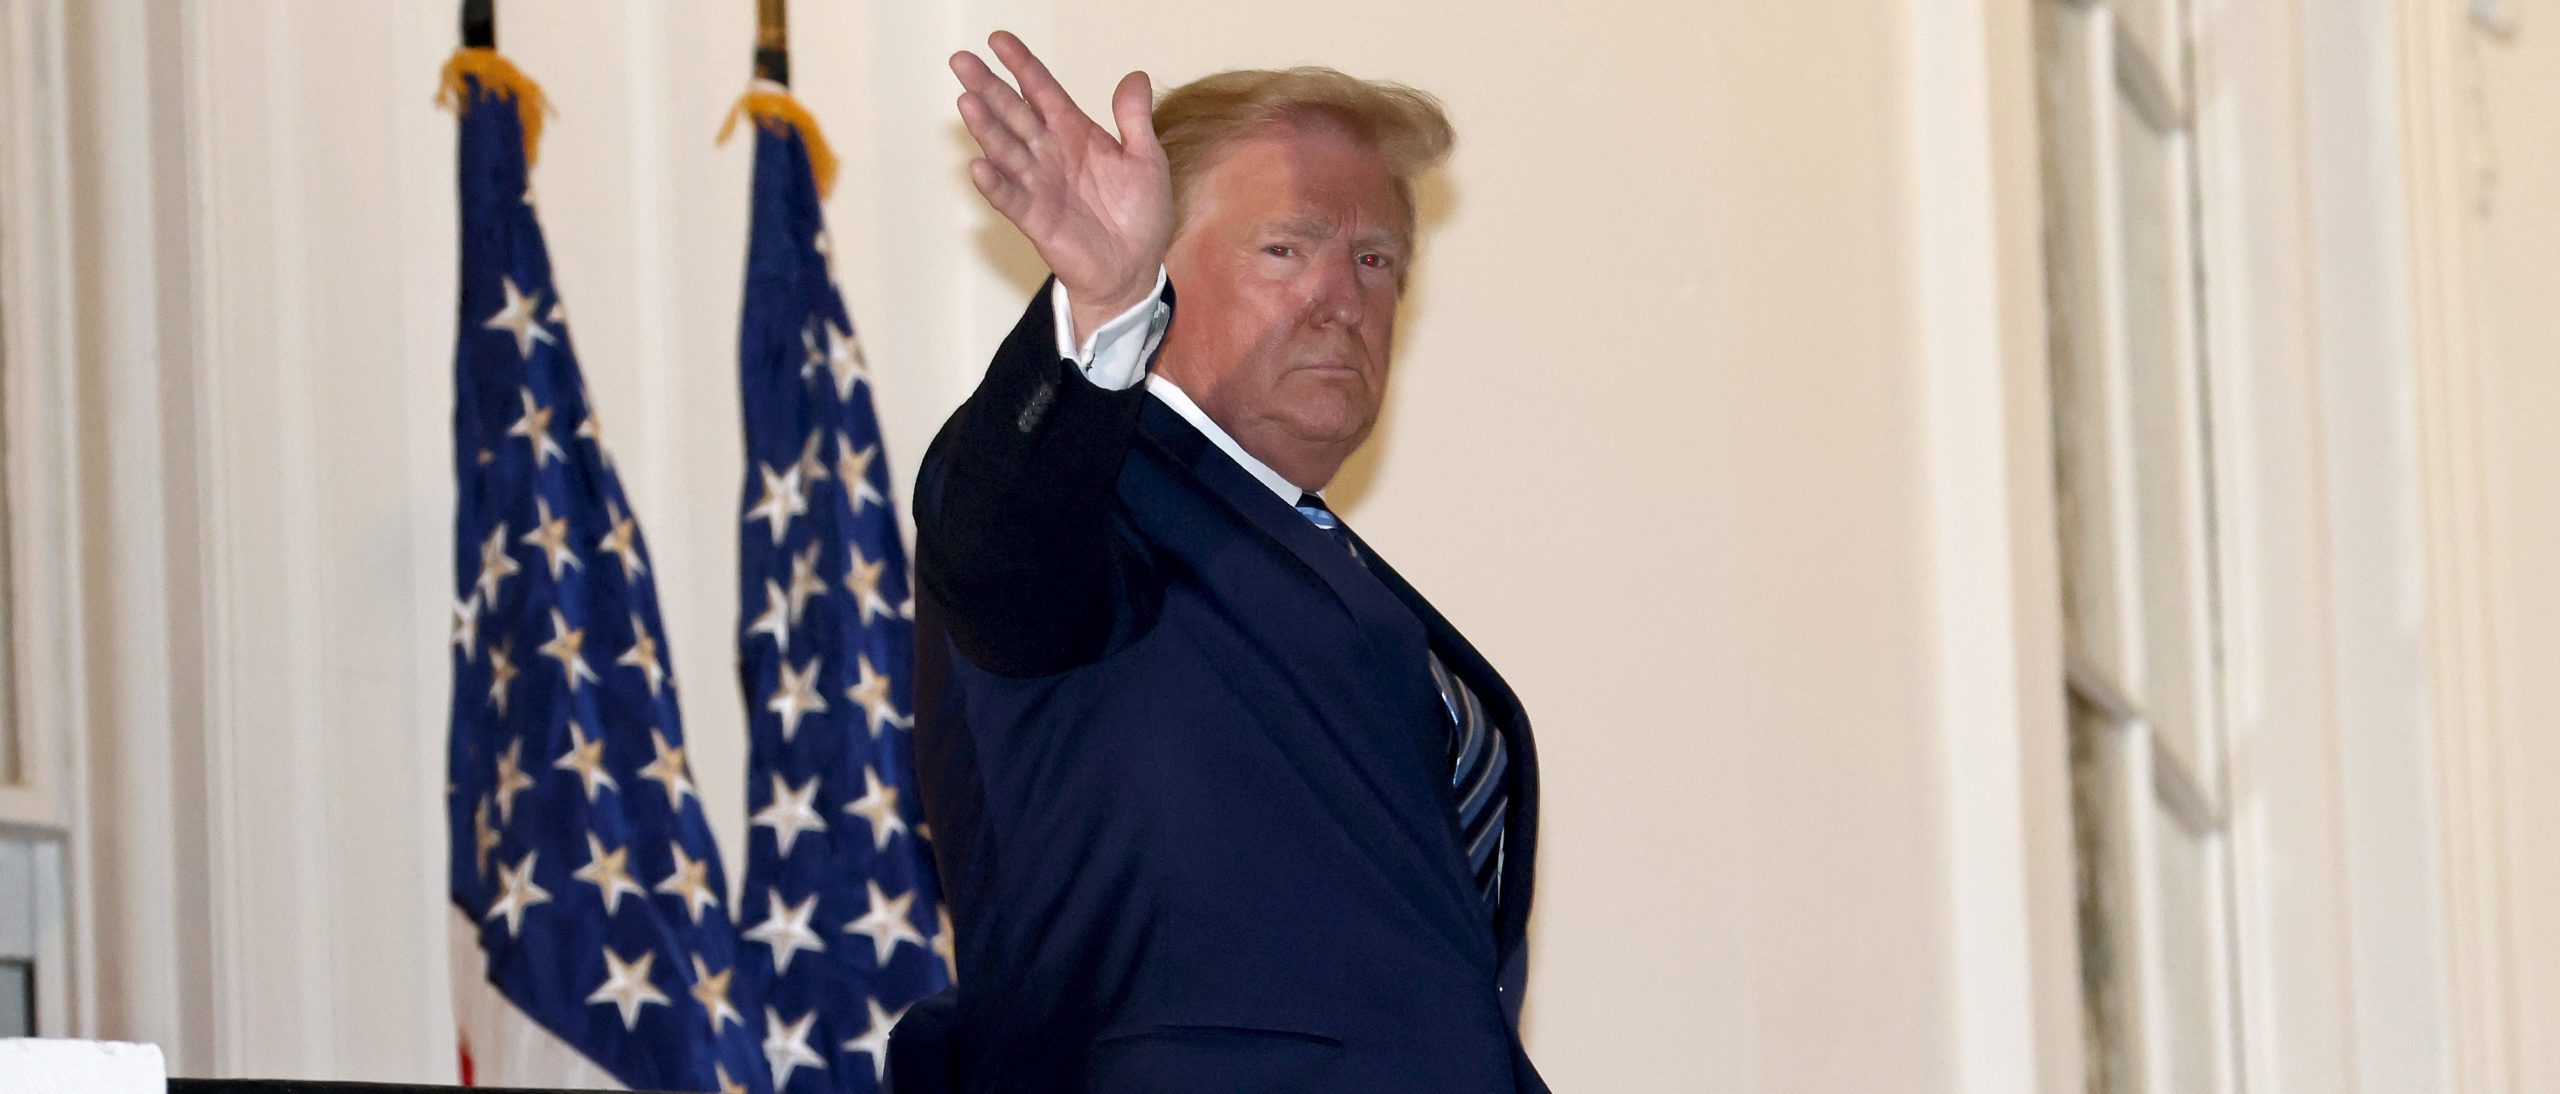 WASHINGTON, DC - OCTOBER 05: U.S. President Donald Trump waves upon return to the White House from Walter Reed National Military Medical Center on October 05, 2020 in Washington, DC. Trump spent three days hospitalized for coronavirus. (Photo by Win McNamee/Getty Images)